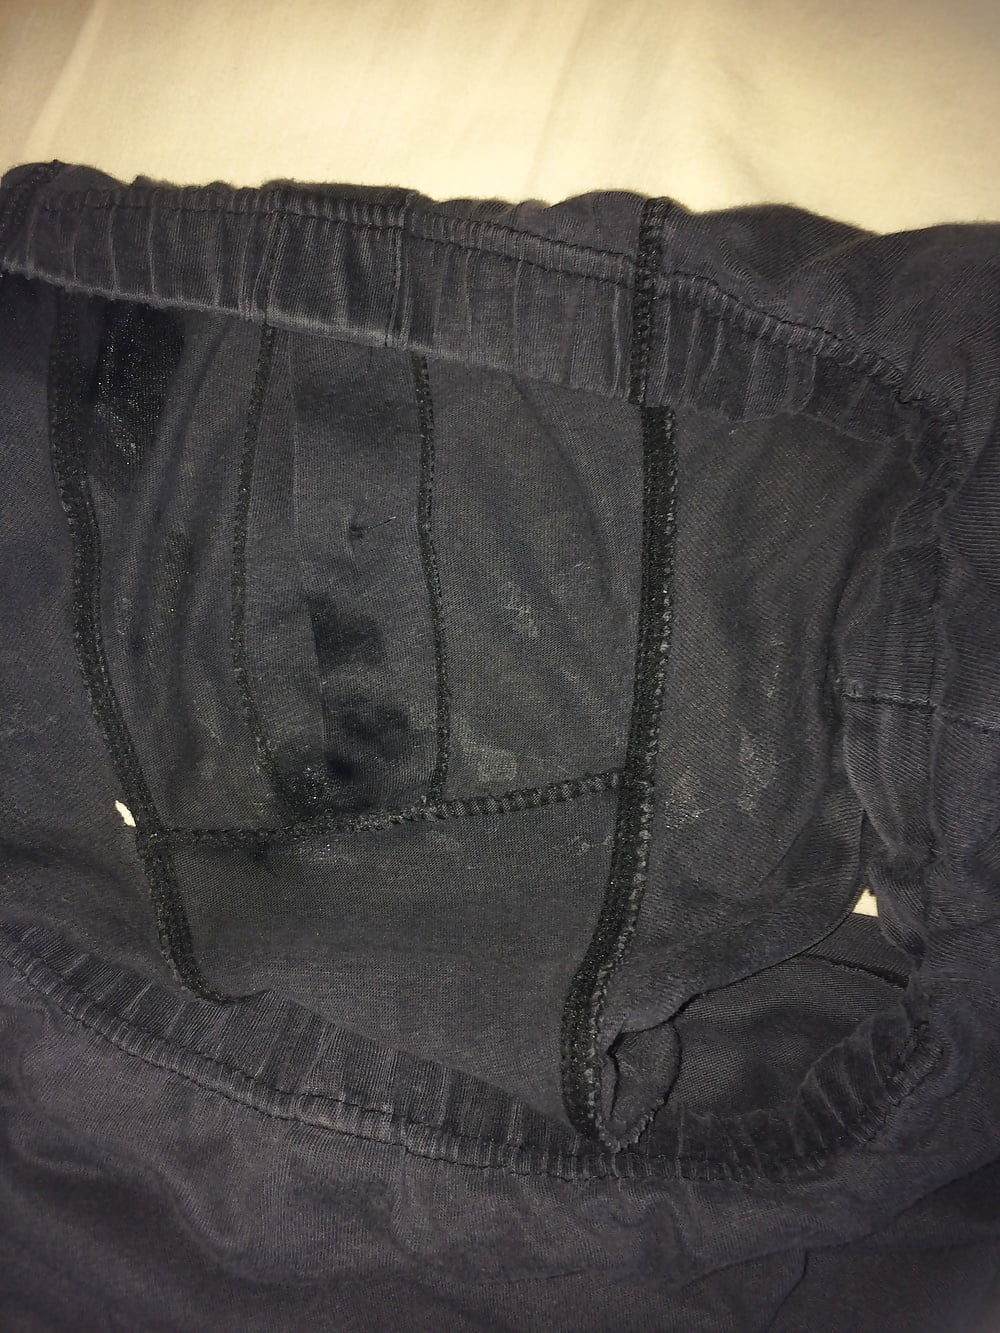 Precum_stained_boxers (2/2)